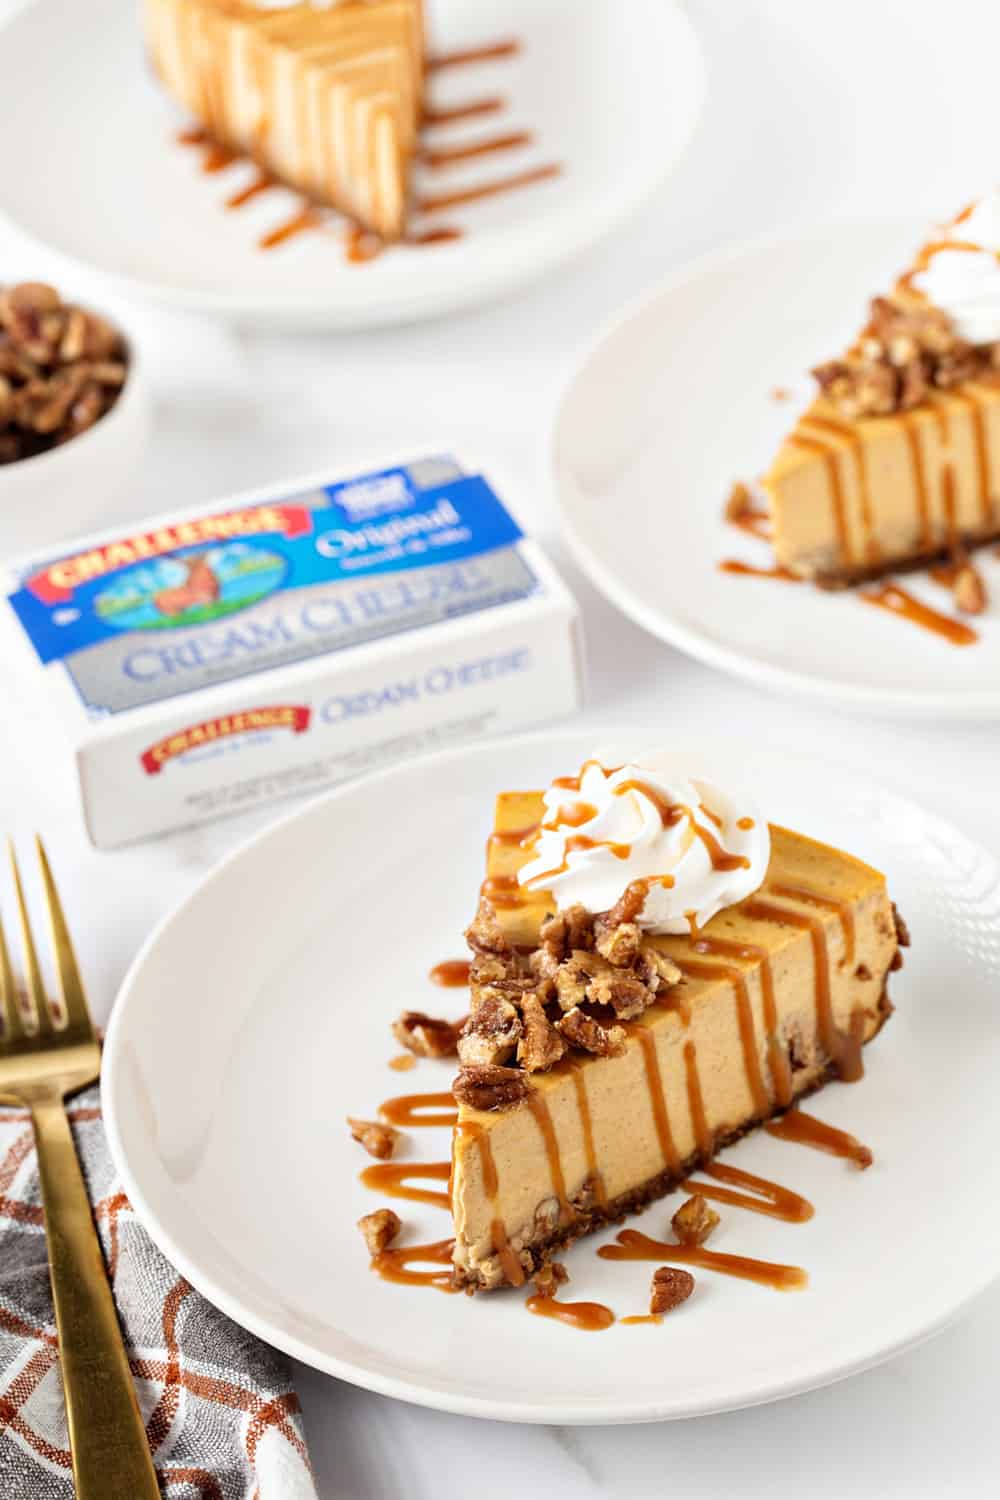 Pumpkin Praline Cheesecake is the perfect dessert for Thanksgiving dinner. It's sweet, creamy and loaded with cozy spices.